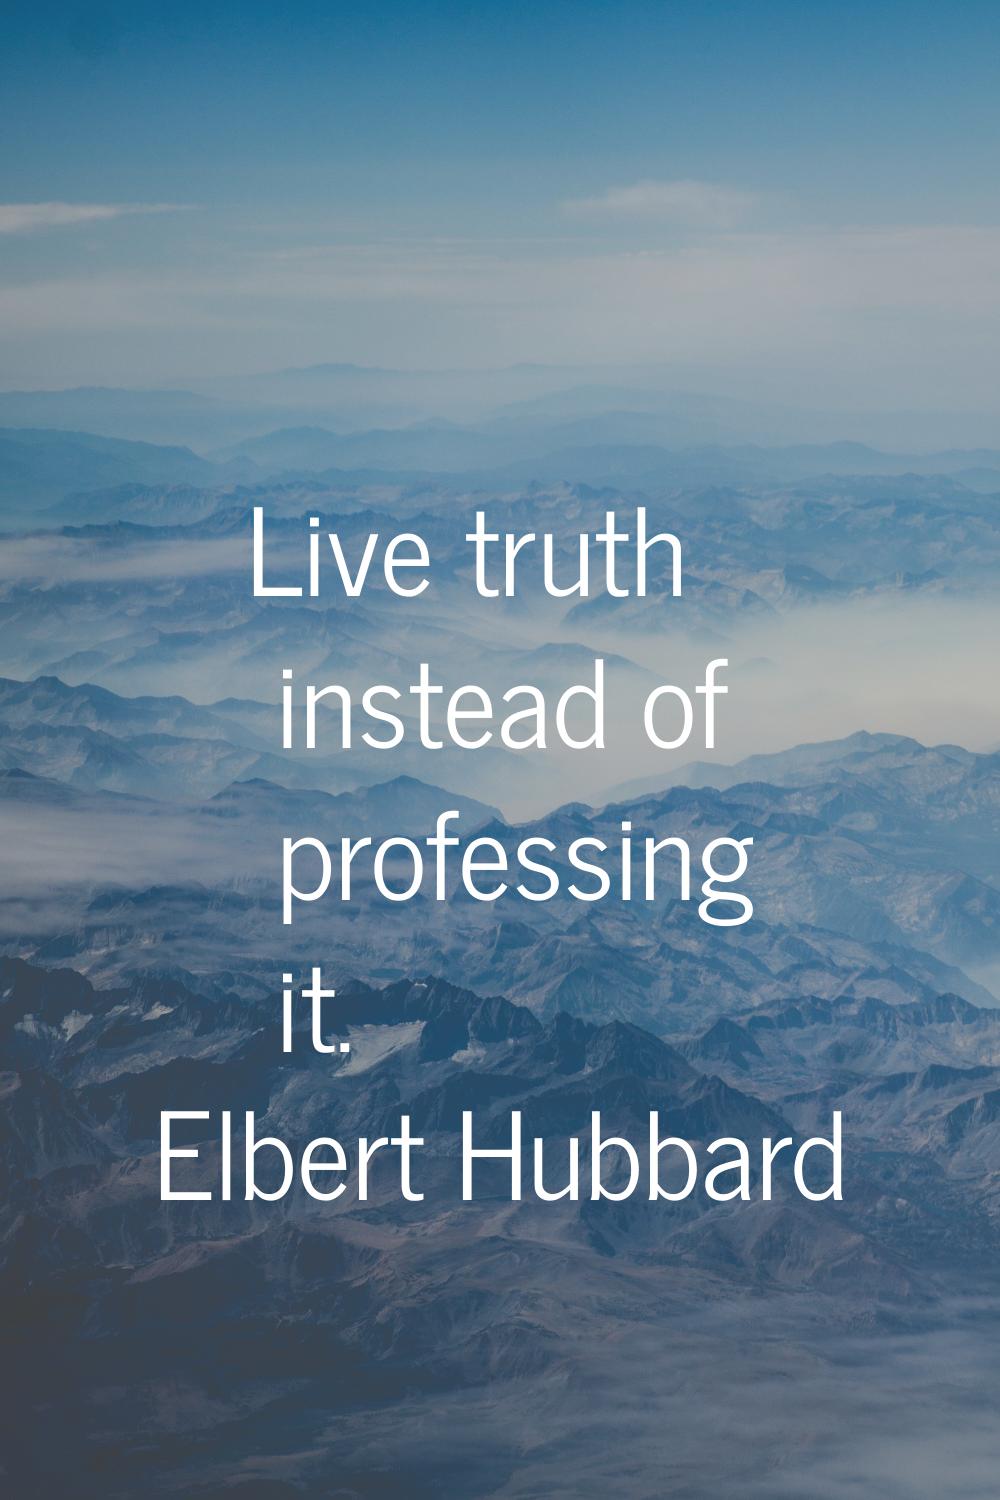 Live truth instead of professing it.